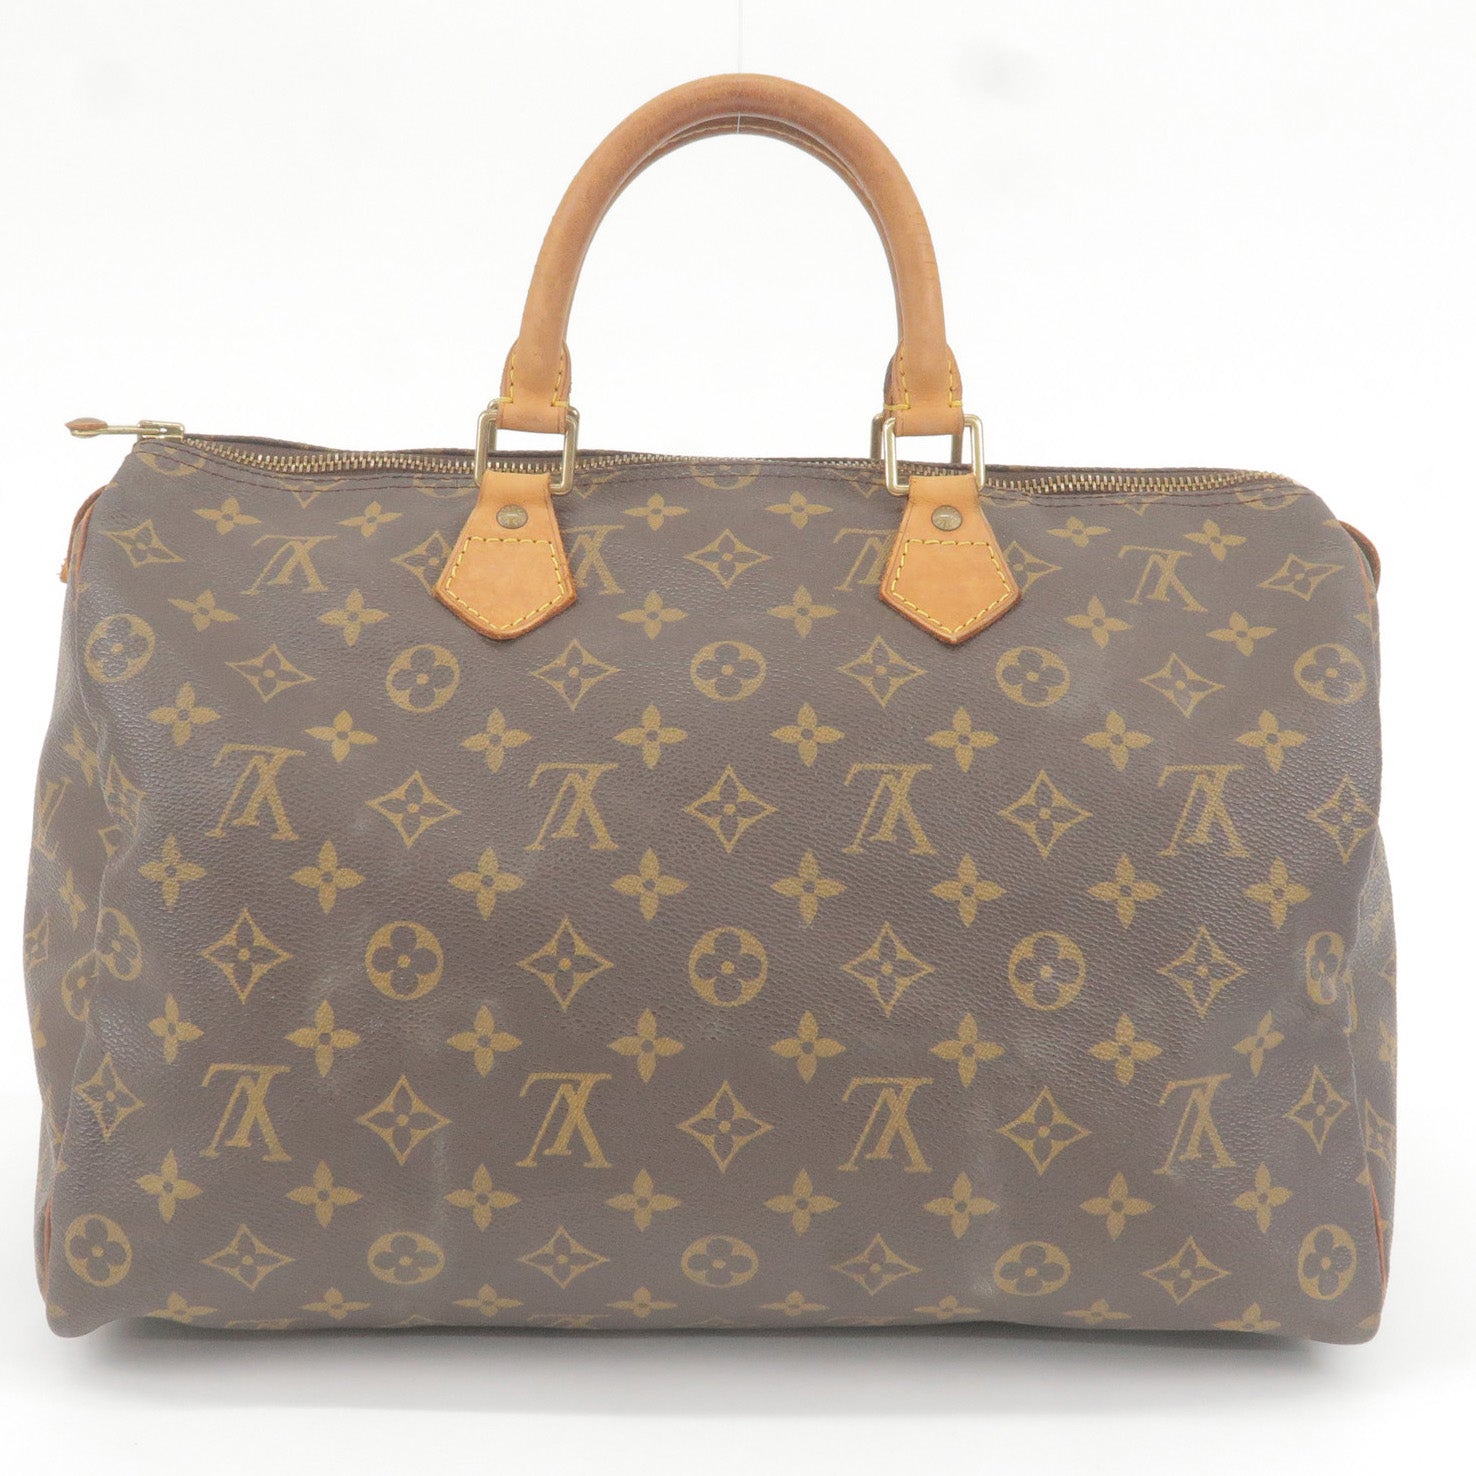 Louis Vuitton Prices in Japan